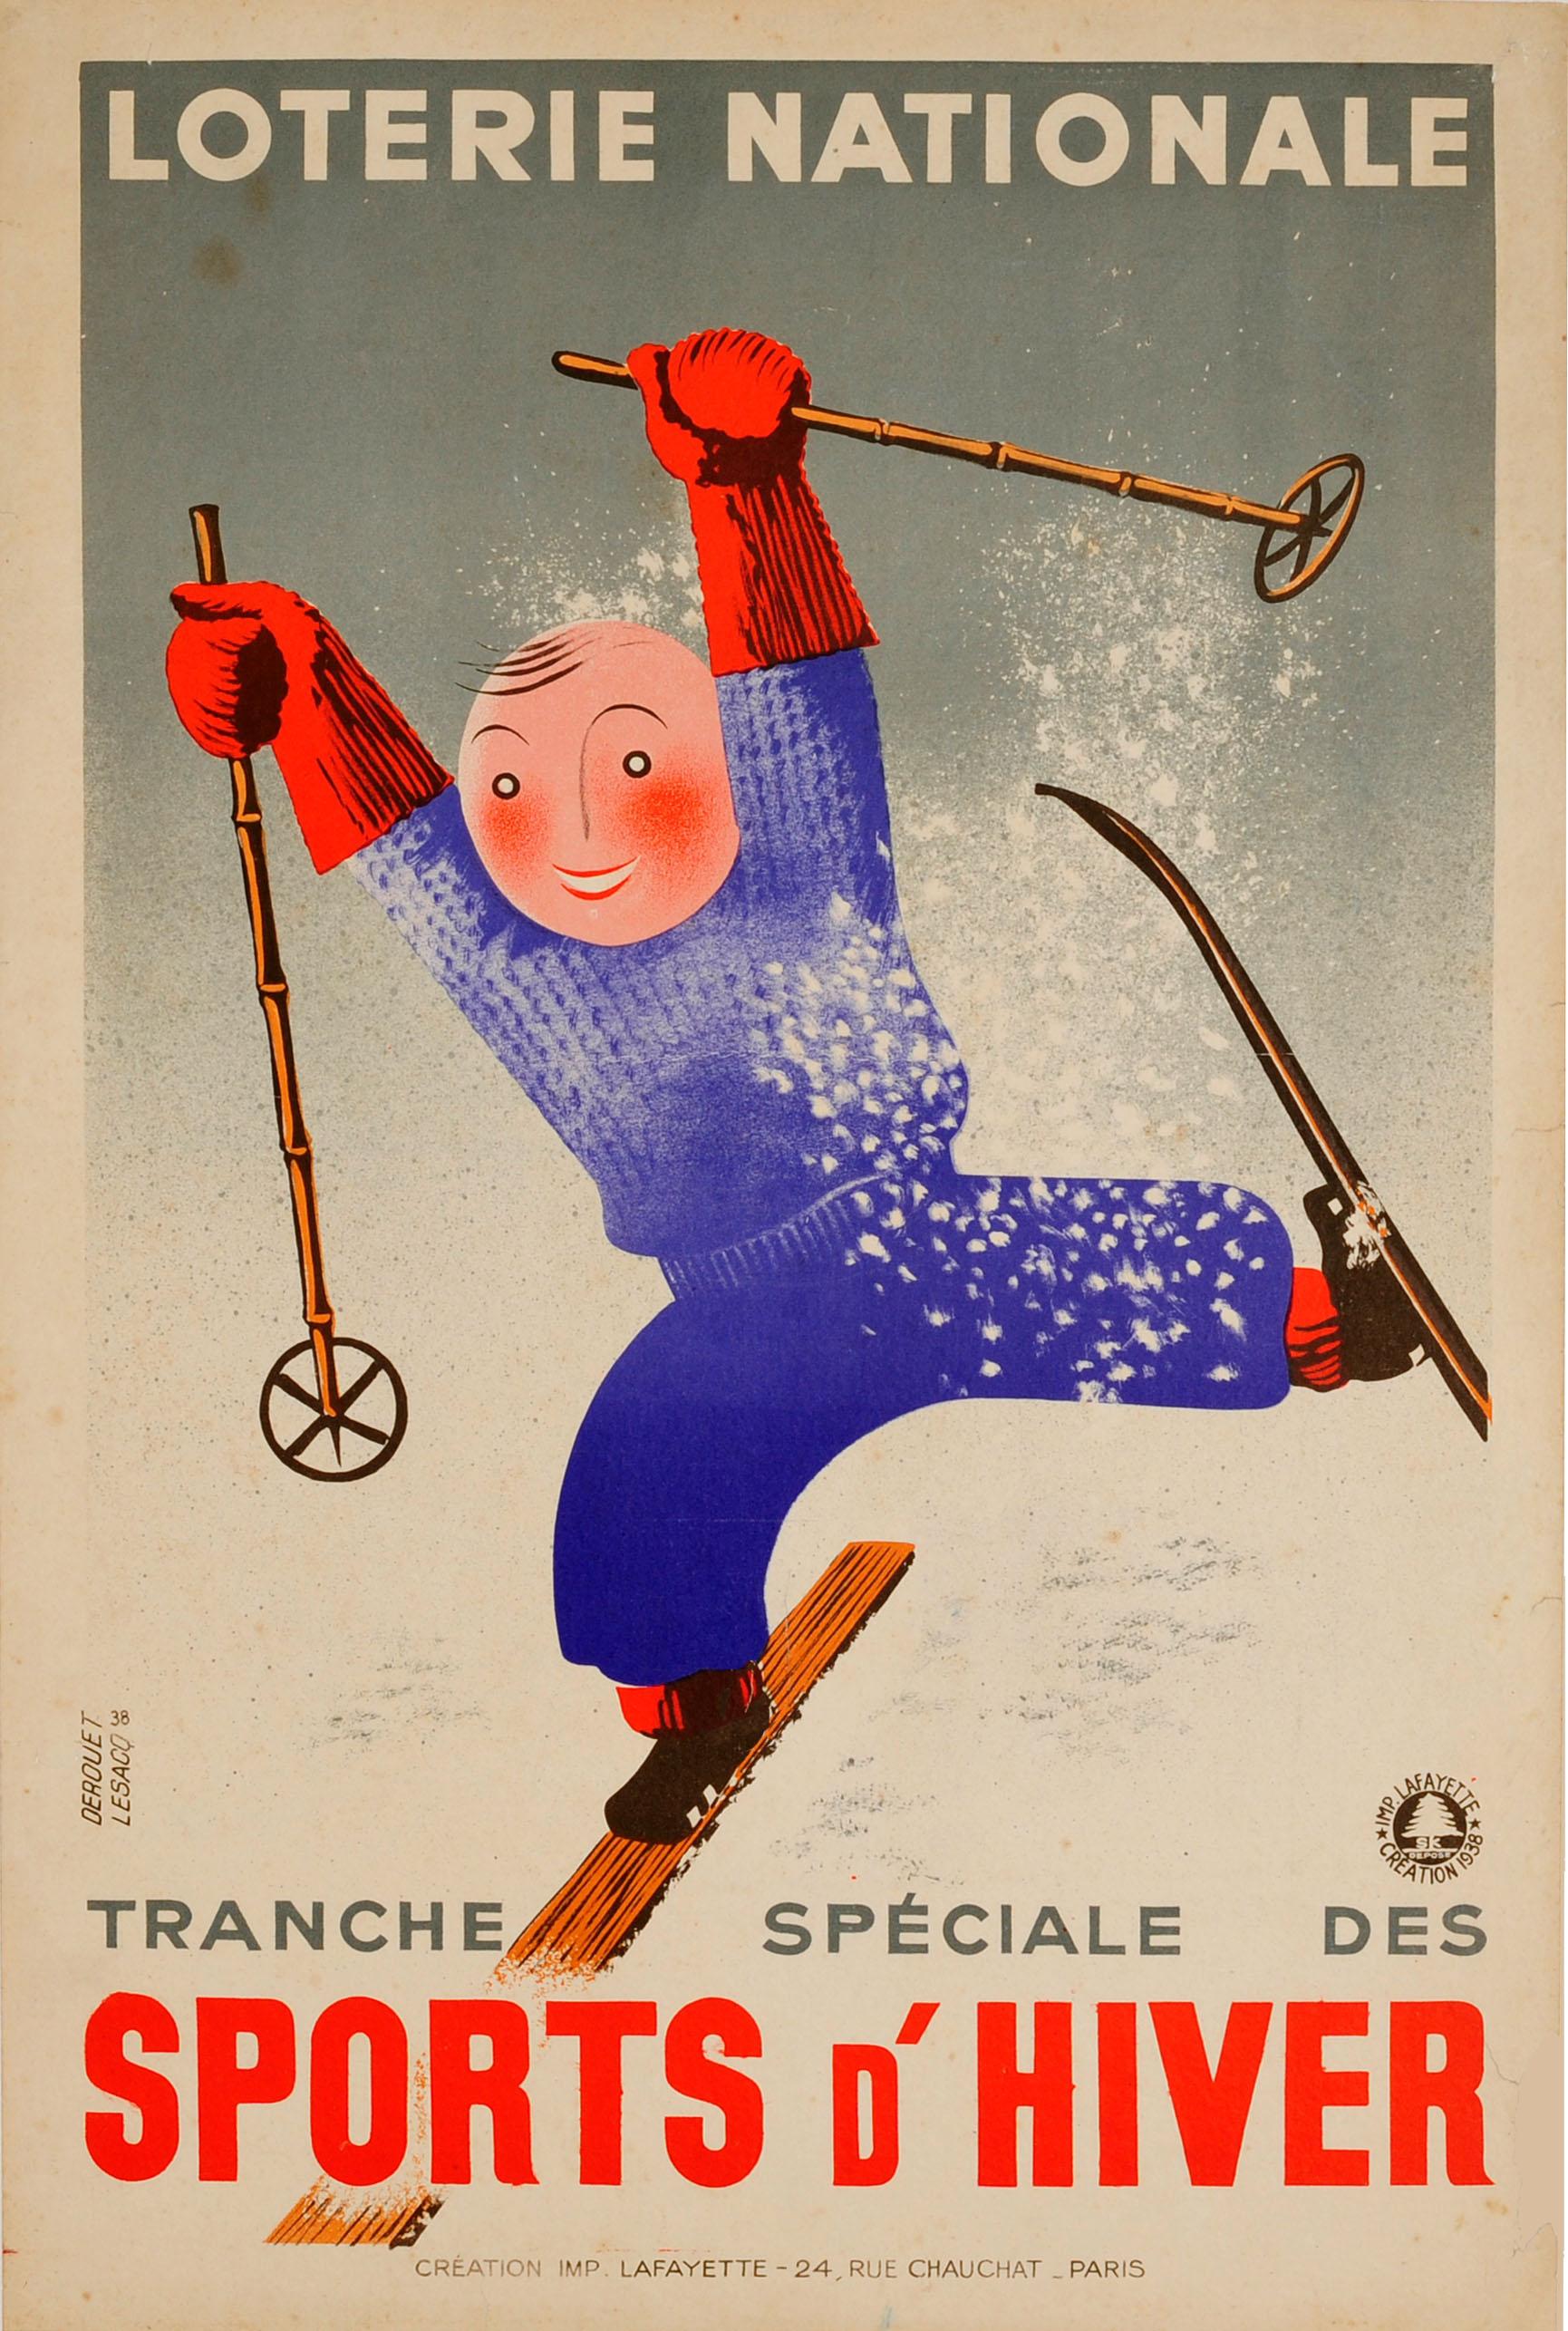 Derouet Lesacq Print - Original Vintage Lottery Poster Loterie Nationale Winter Sports d'Hiver Skiing